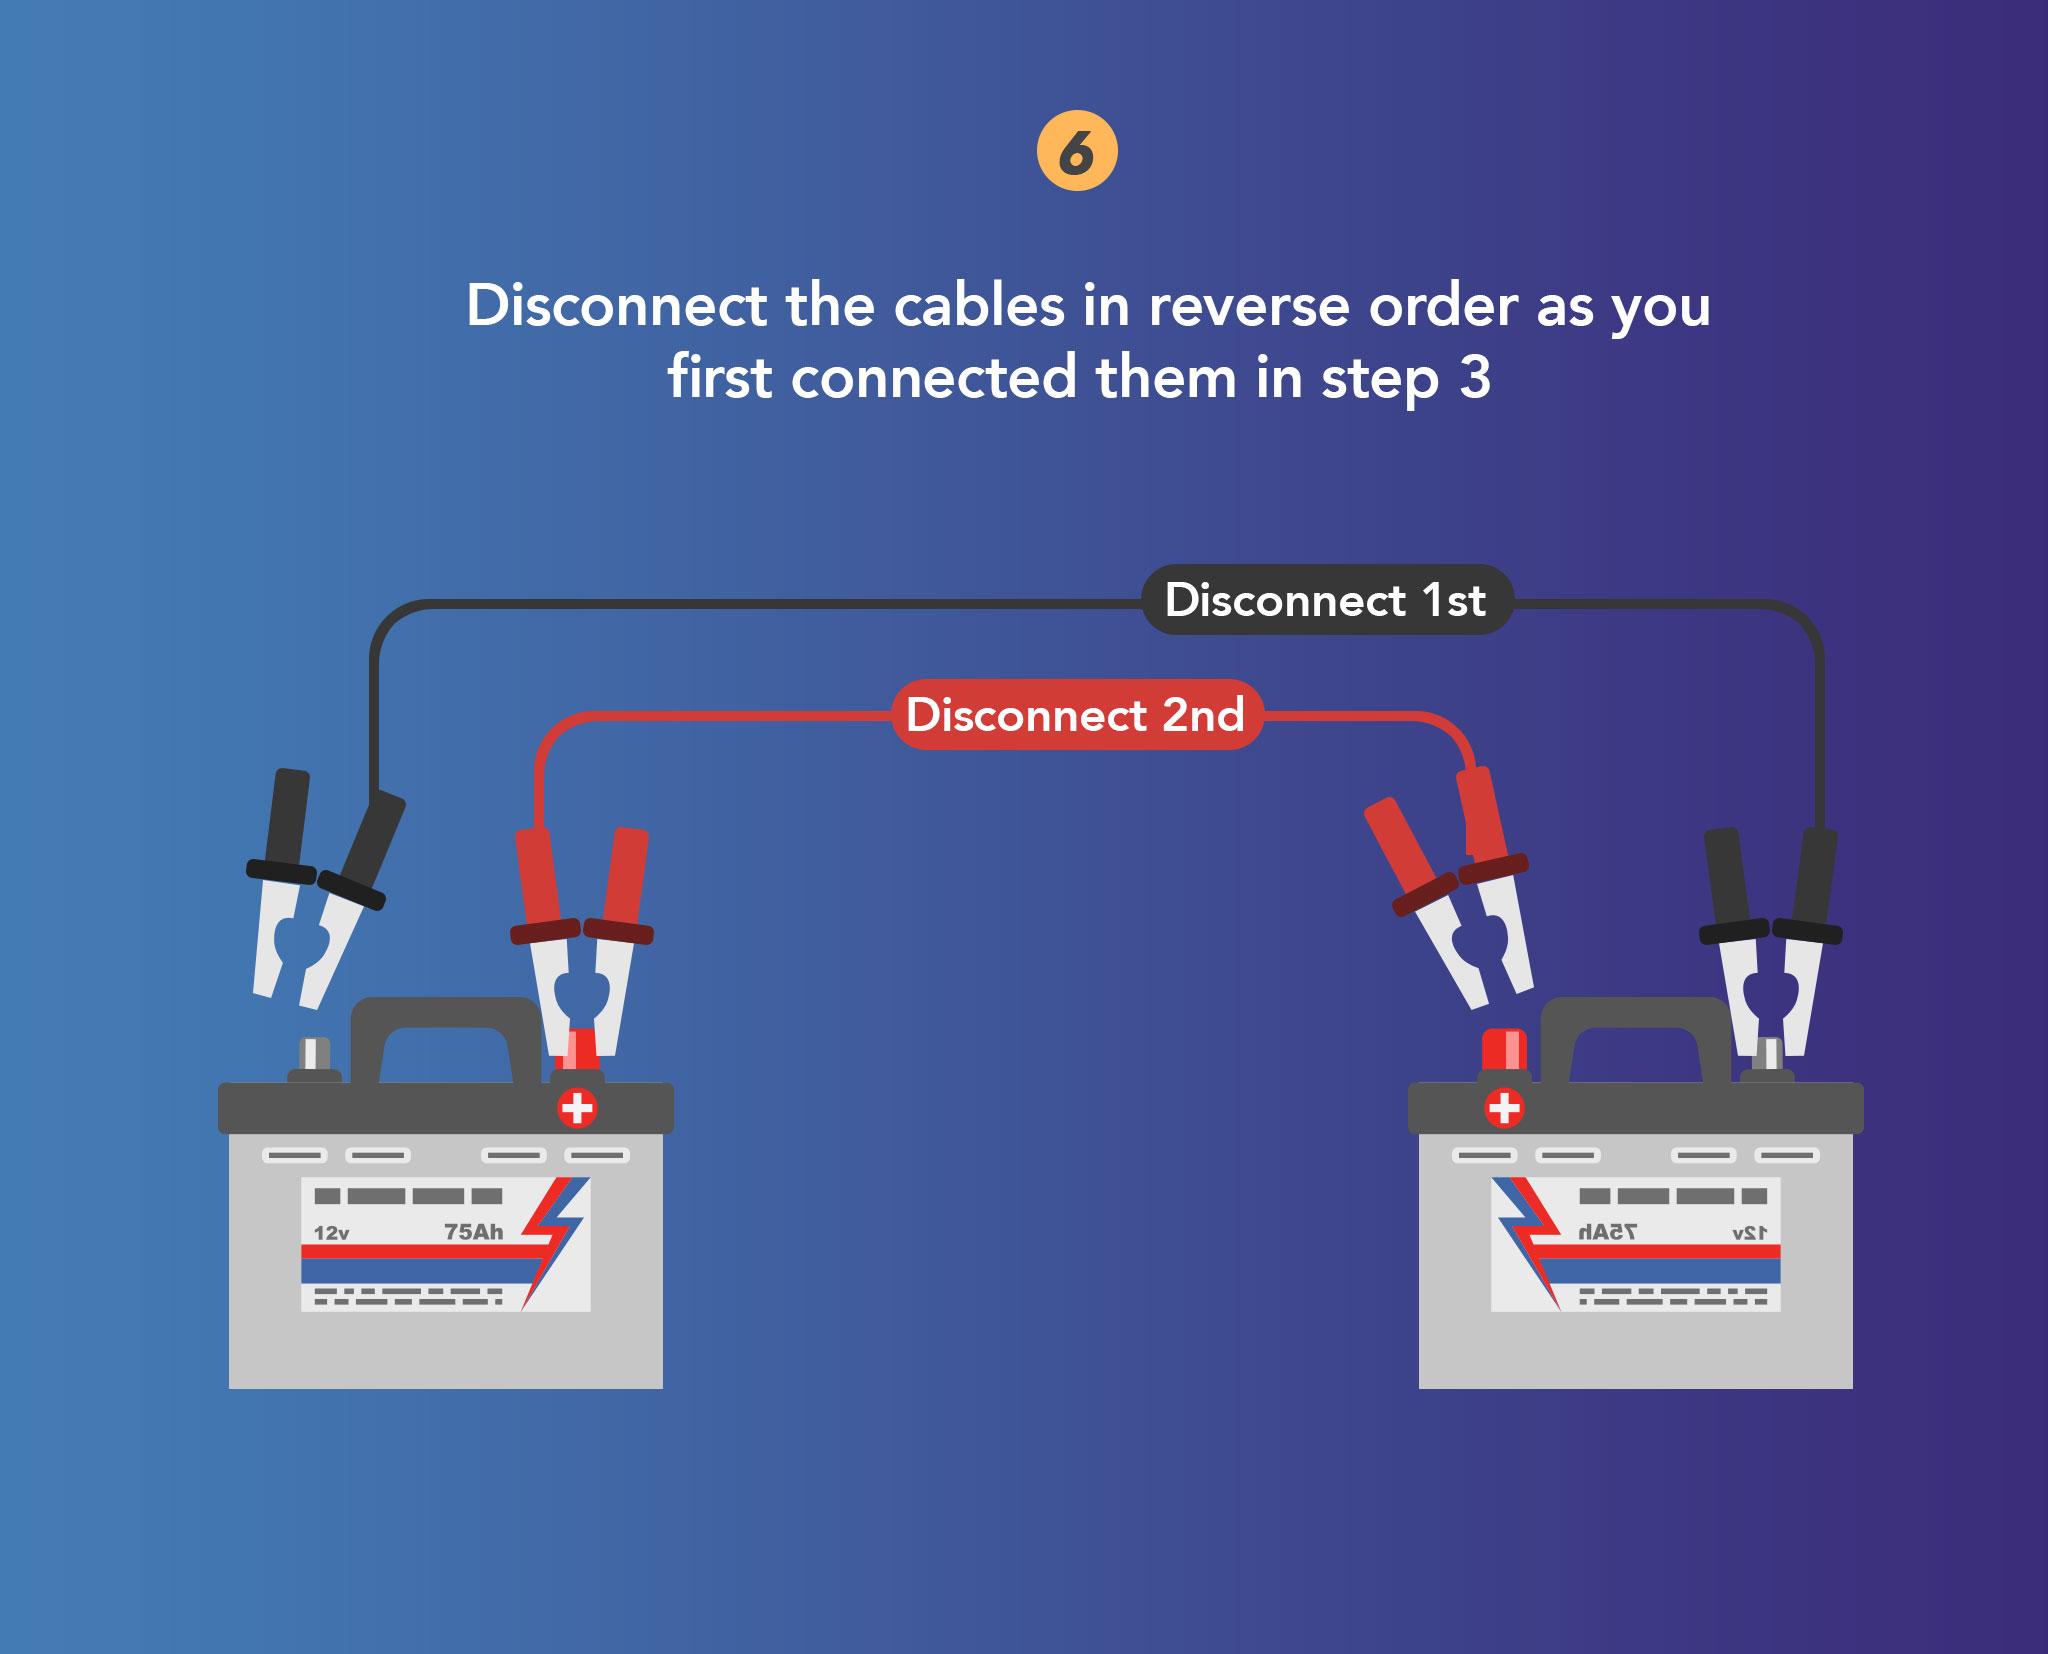 Disconnect the cables in reverse order as you first connected them in step 3